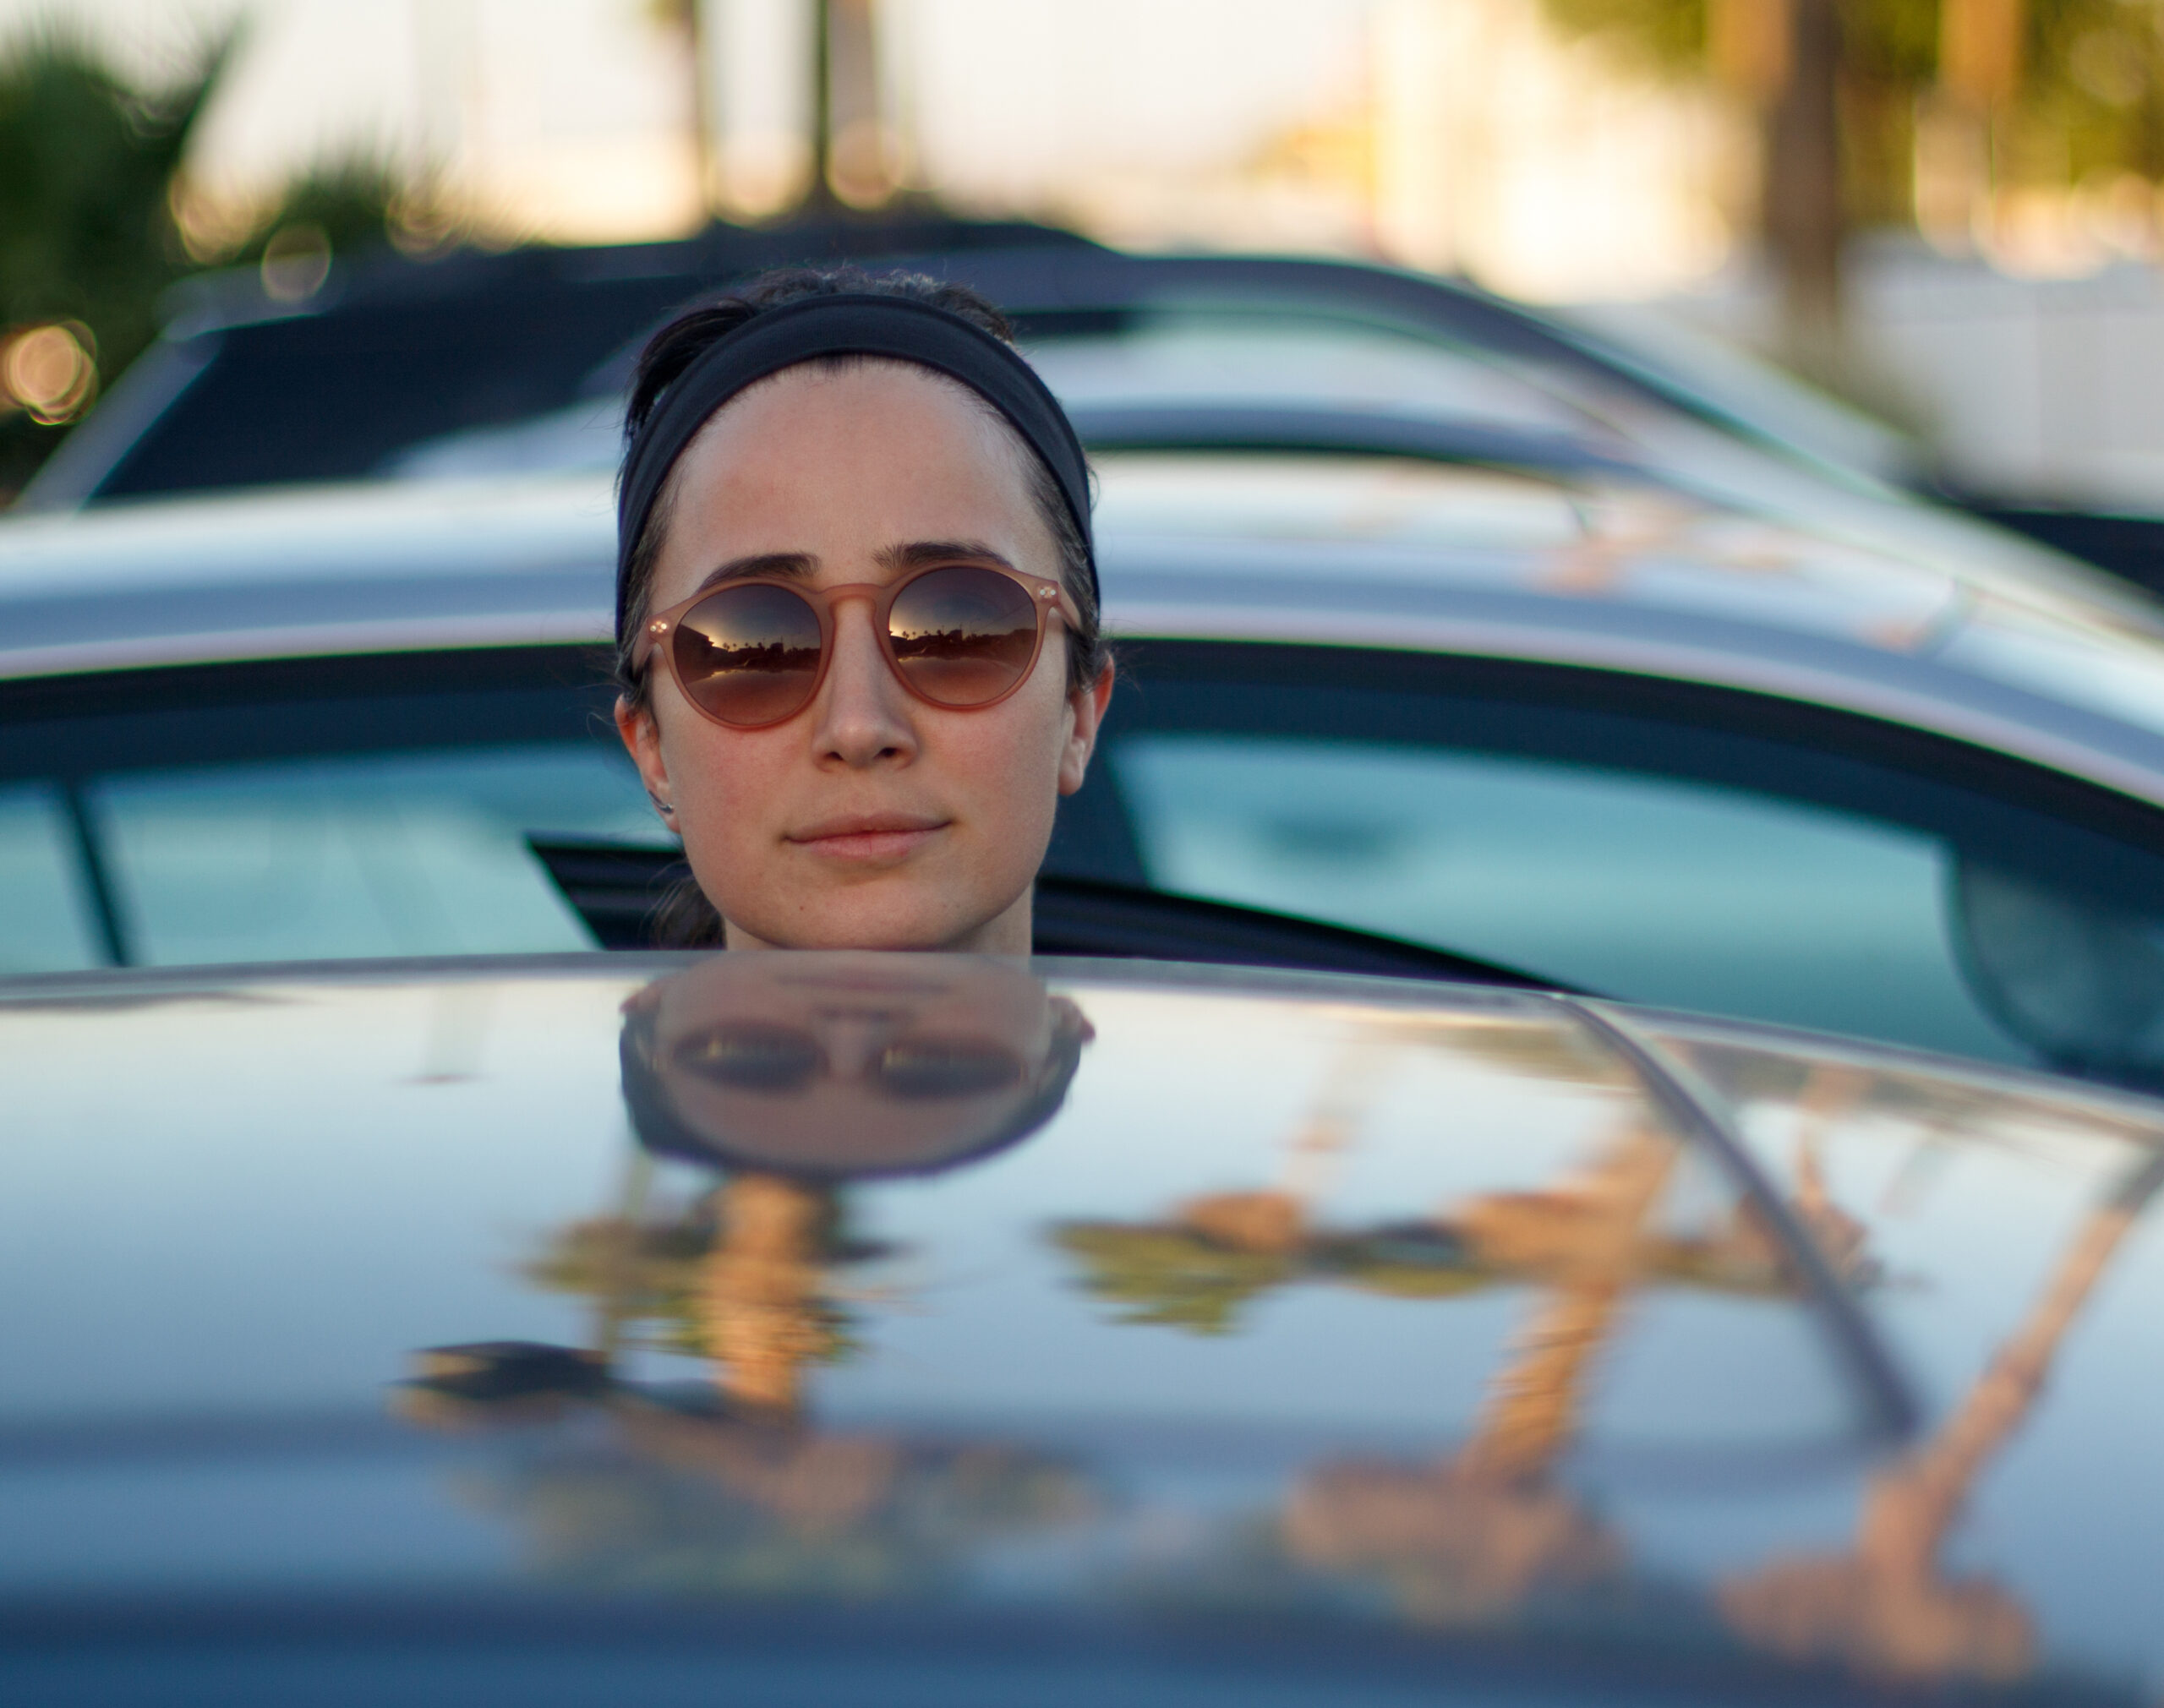 Woman wearing sunglasses sticking her head out from behind the roof of a car, which reflects palm trees in the sunlight.